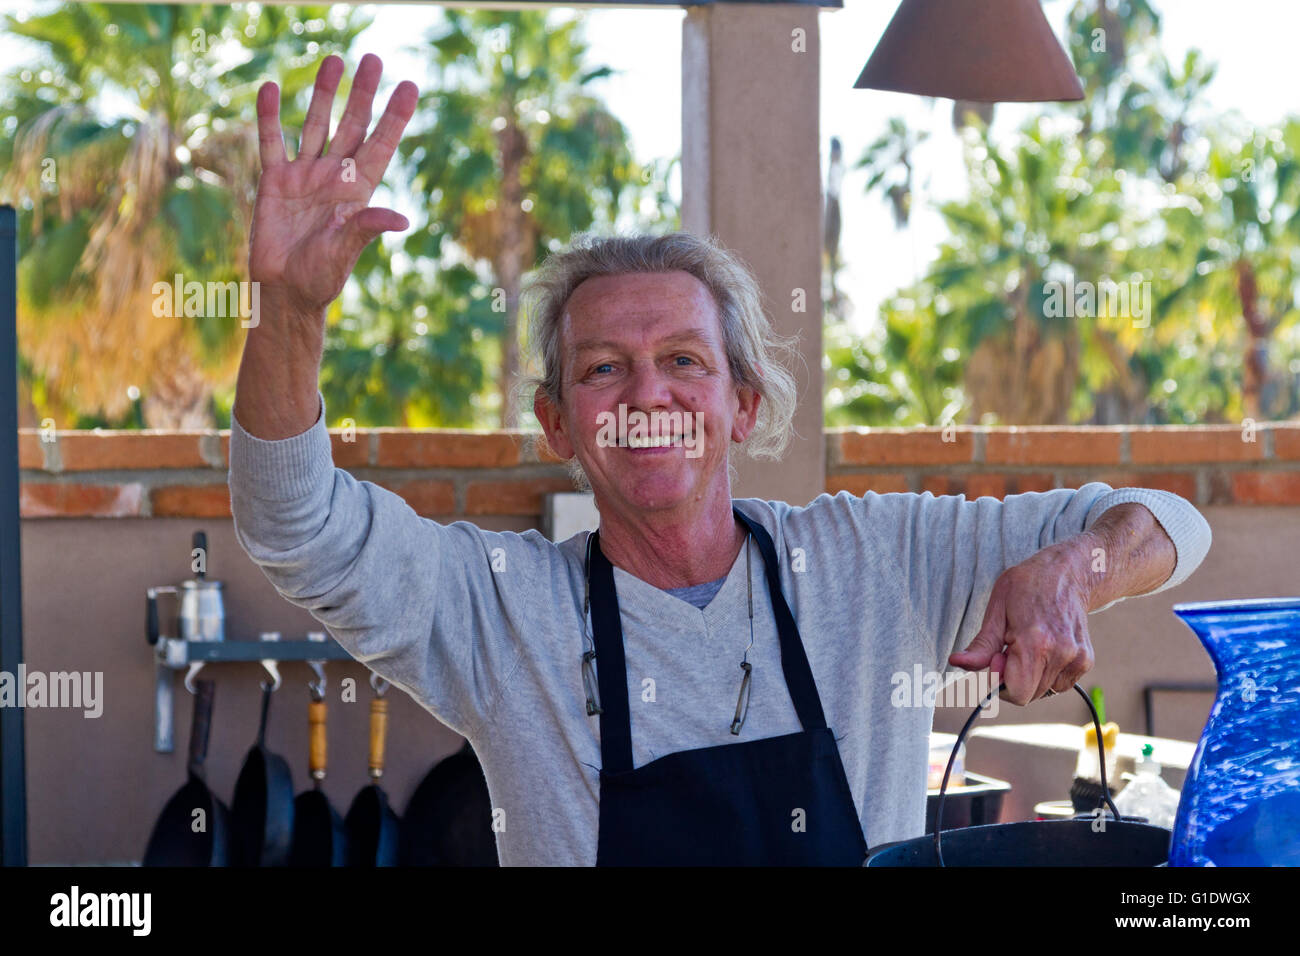 Michael Cope, artist, chef, and restaurateur happily at work in ...